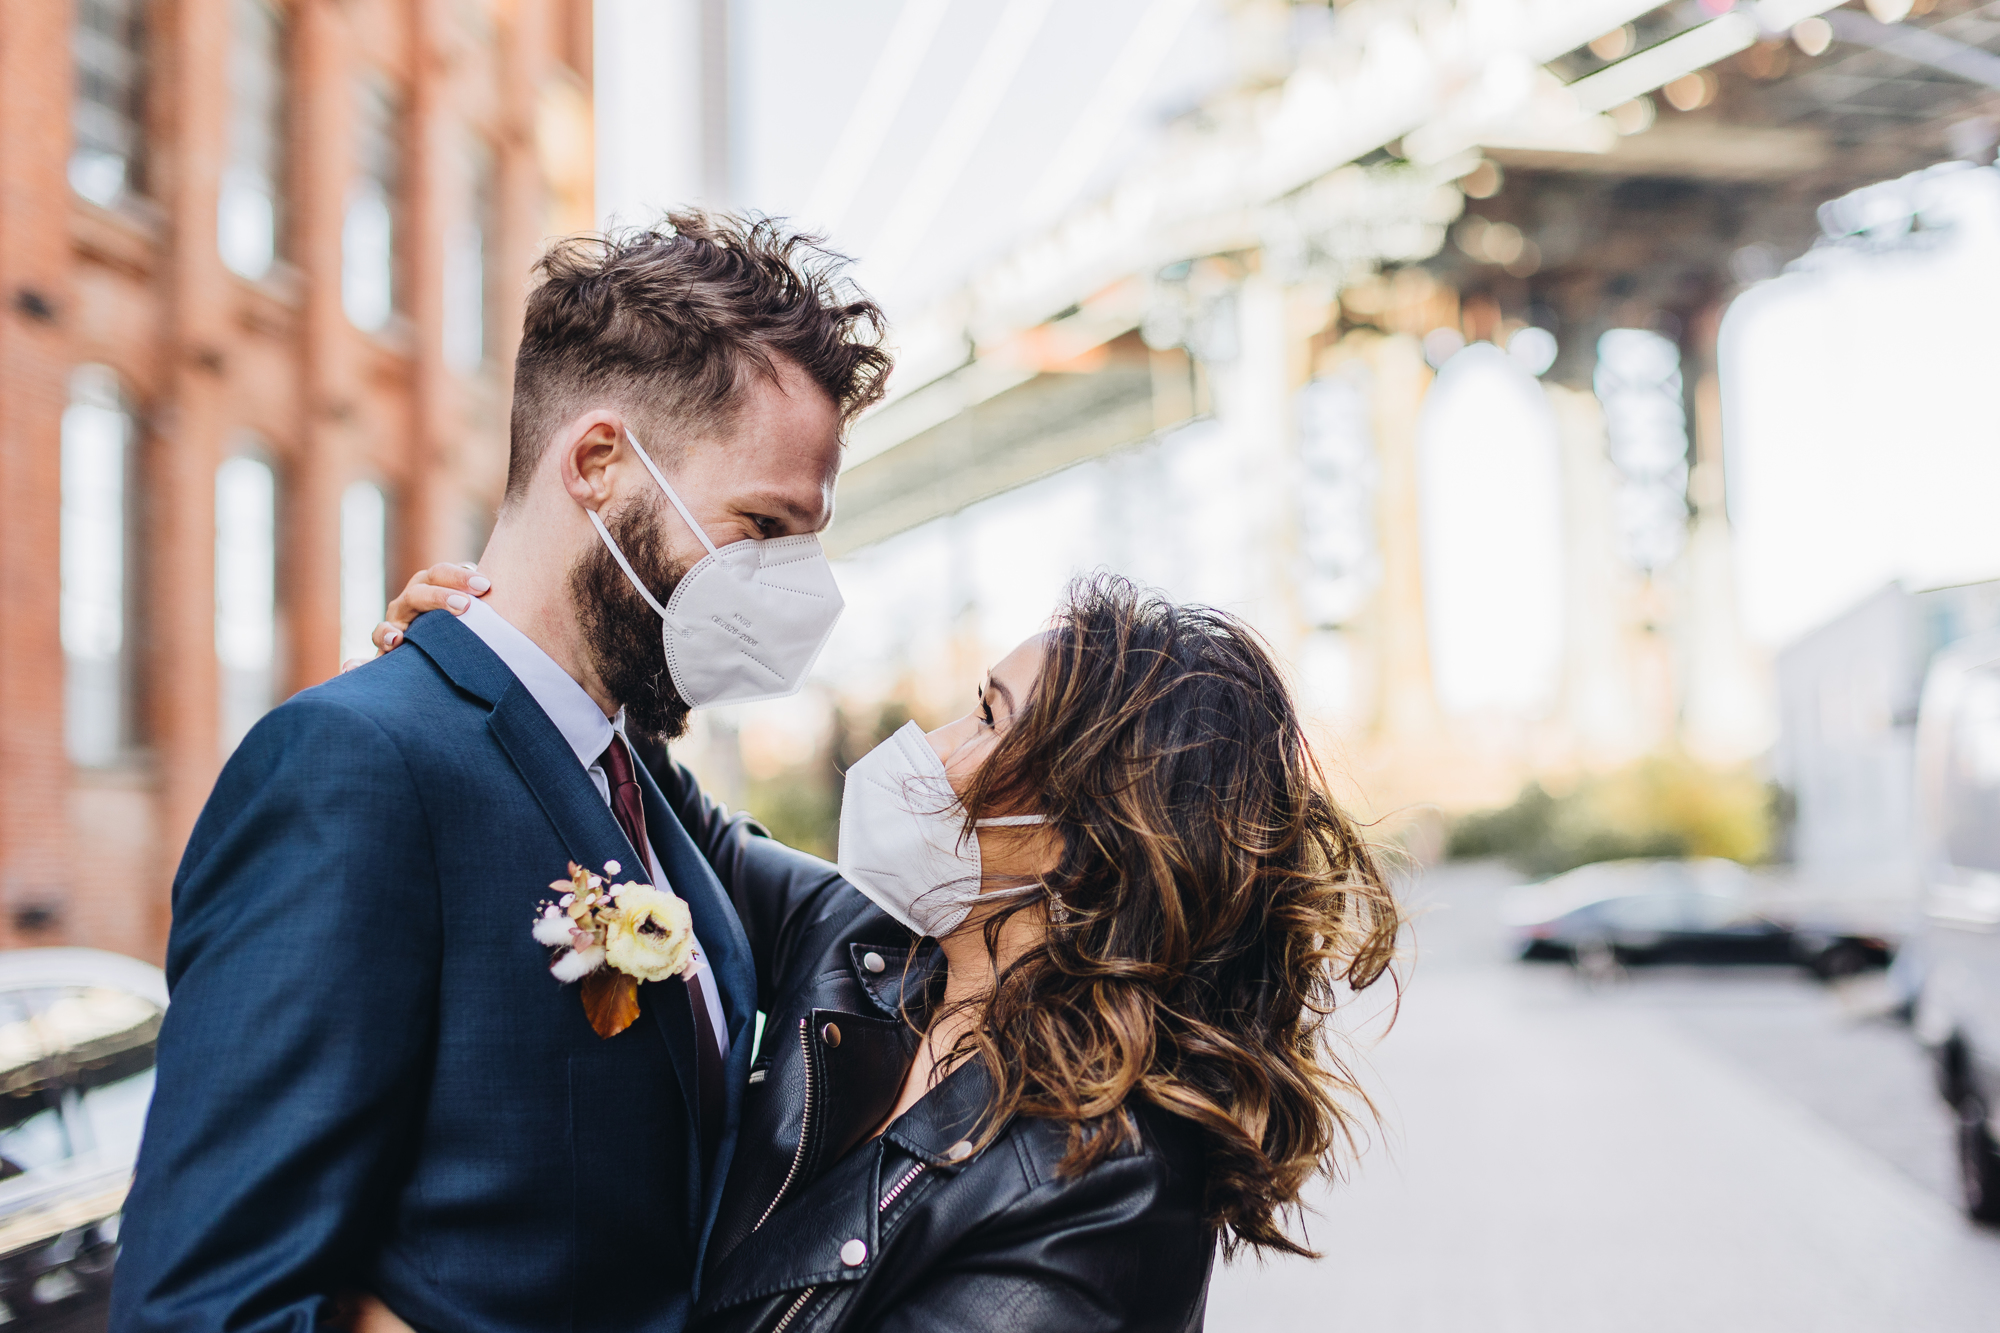 Fun and Candid Fall DUMBO Elopement with New York views and foliage